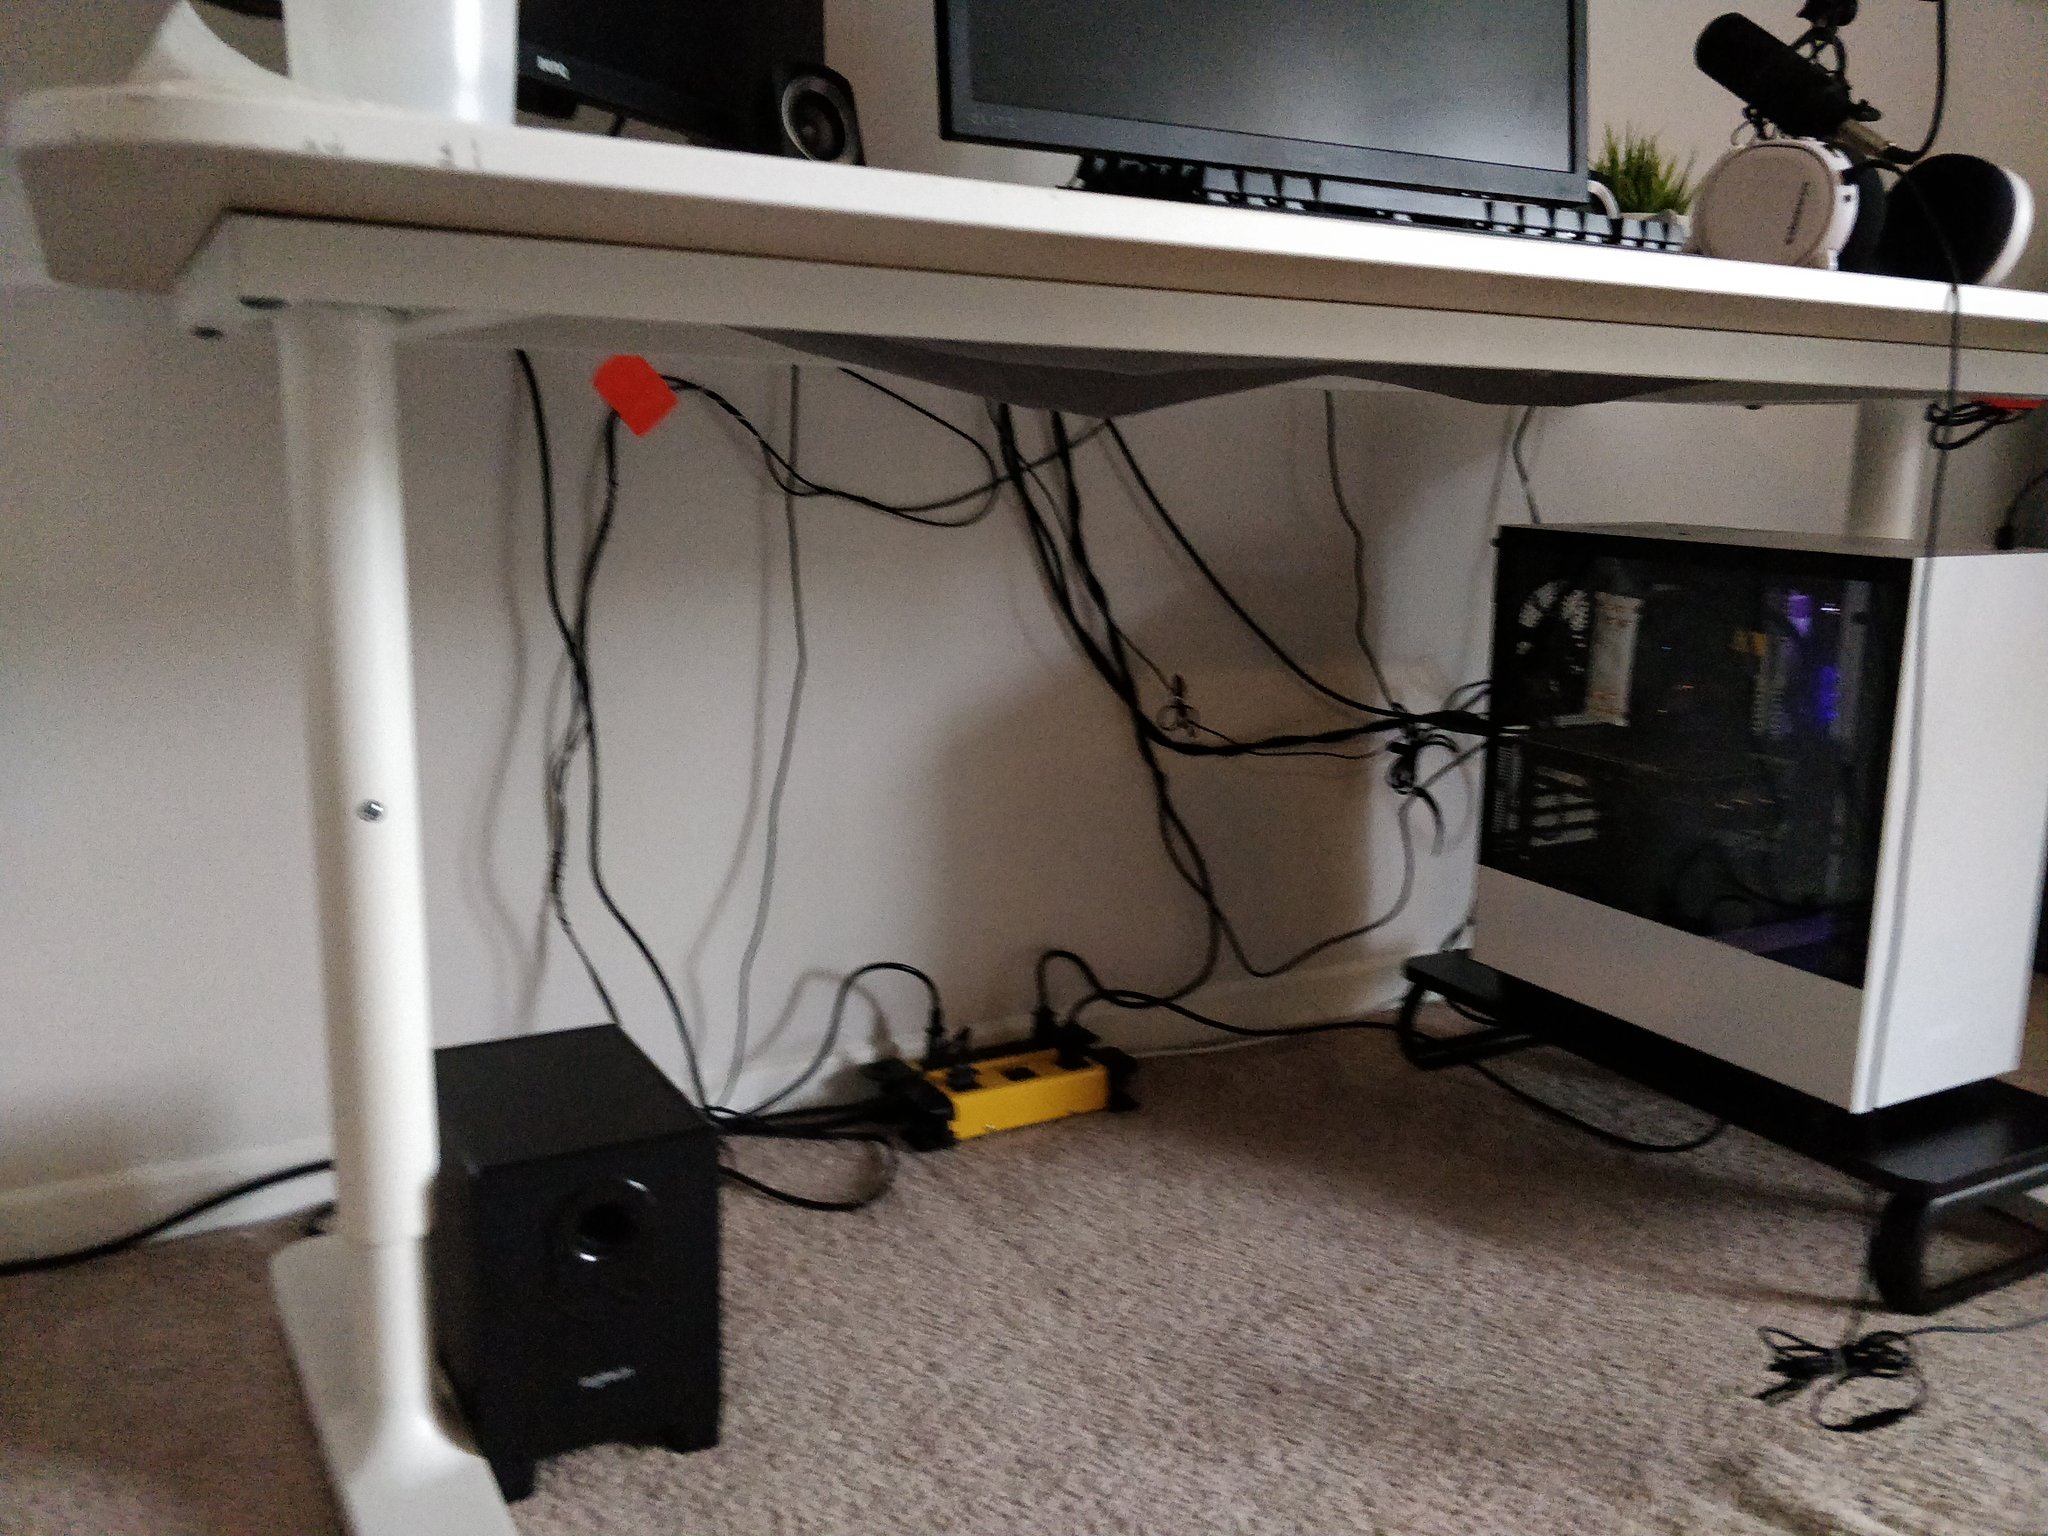 asq2g on X: Before and after pics of doing some cable management